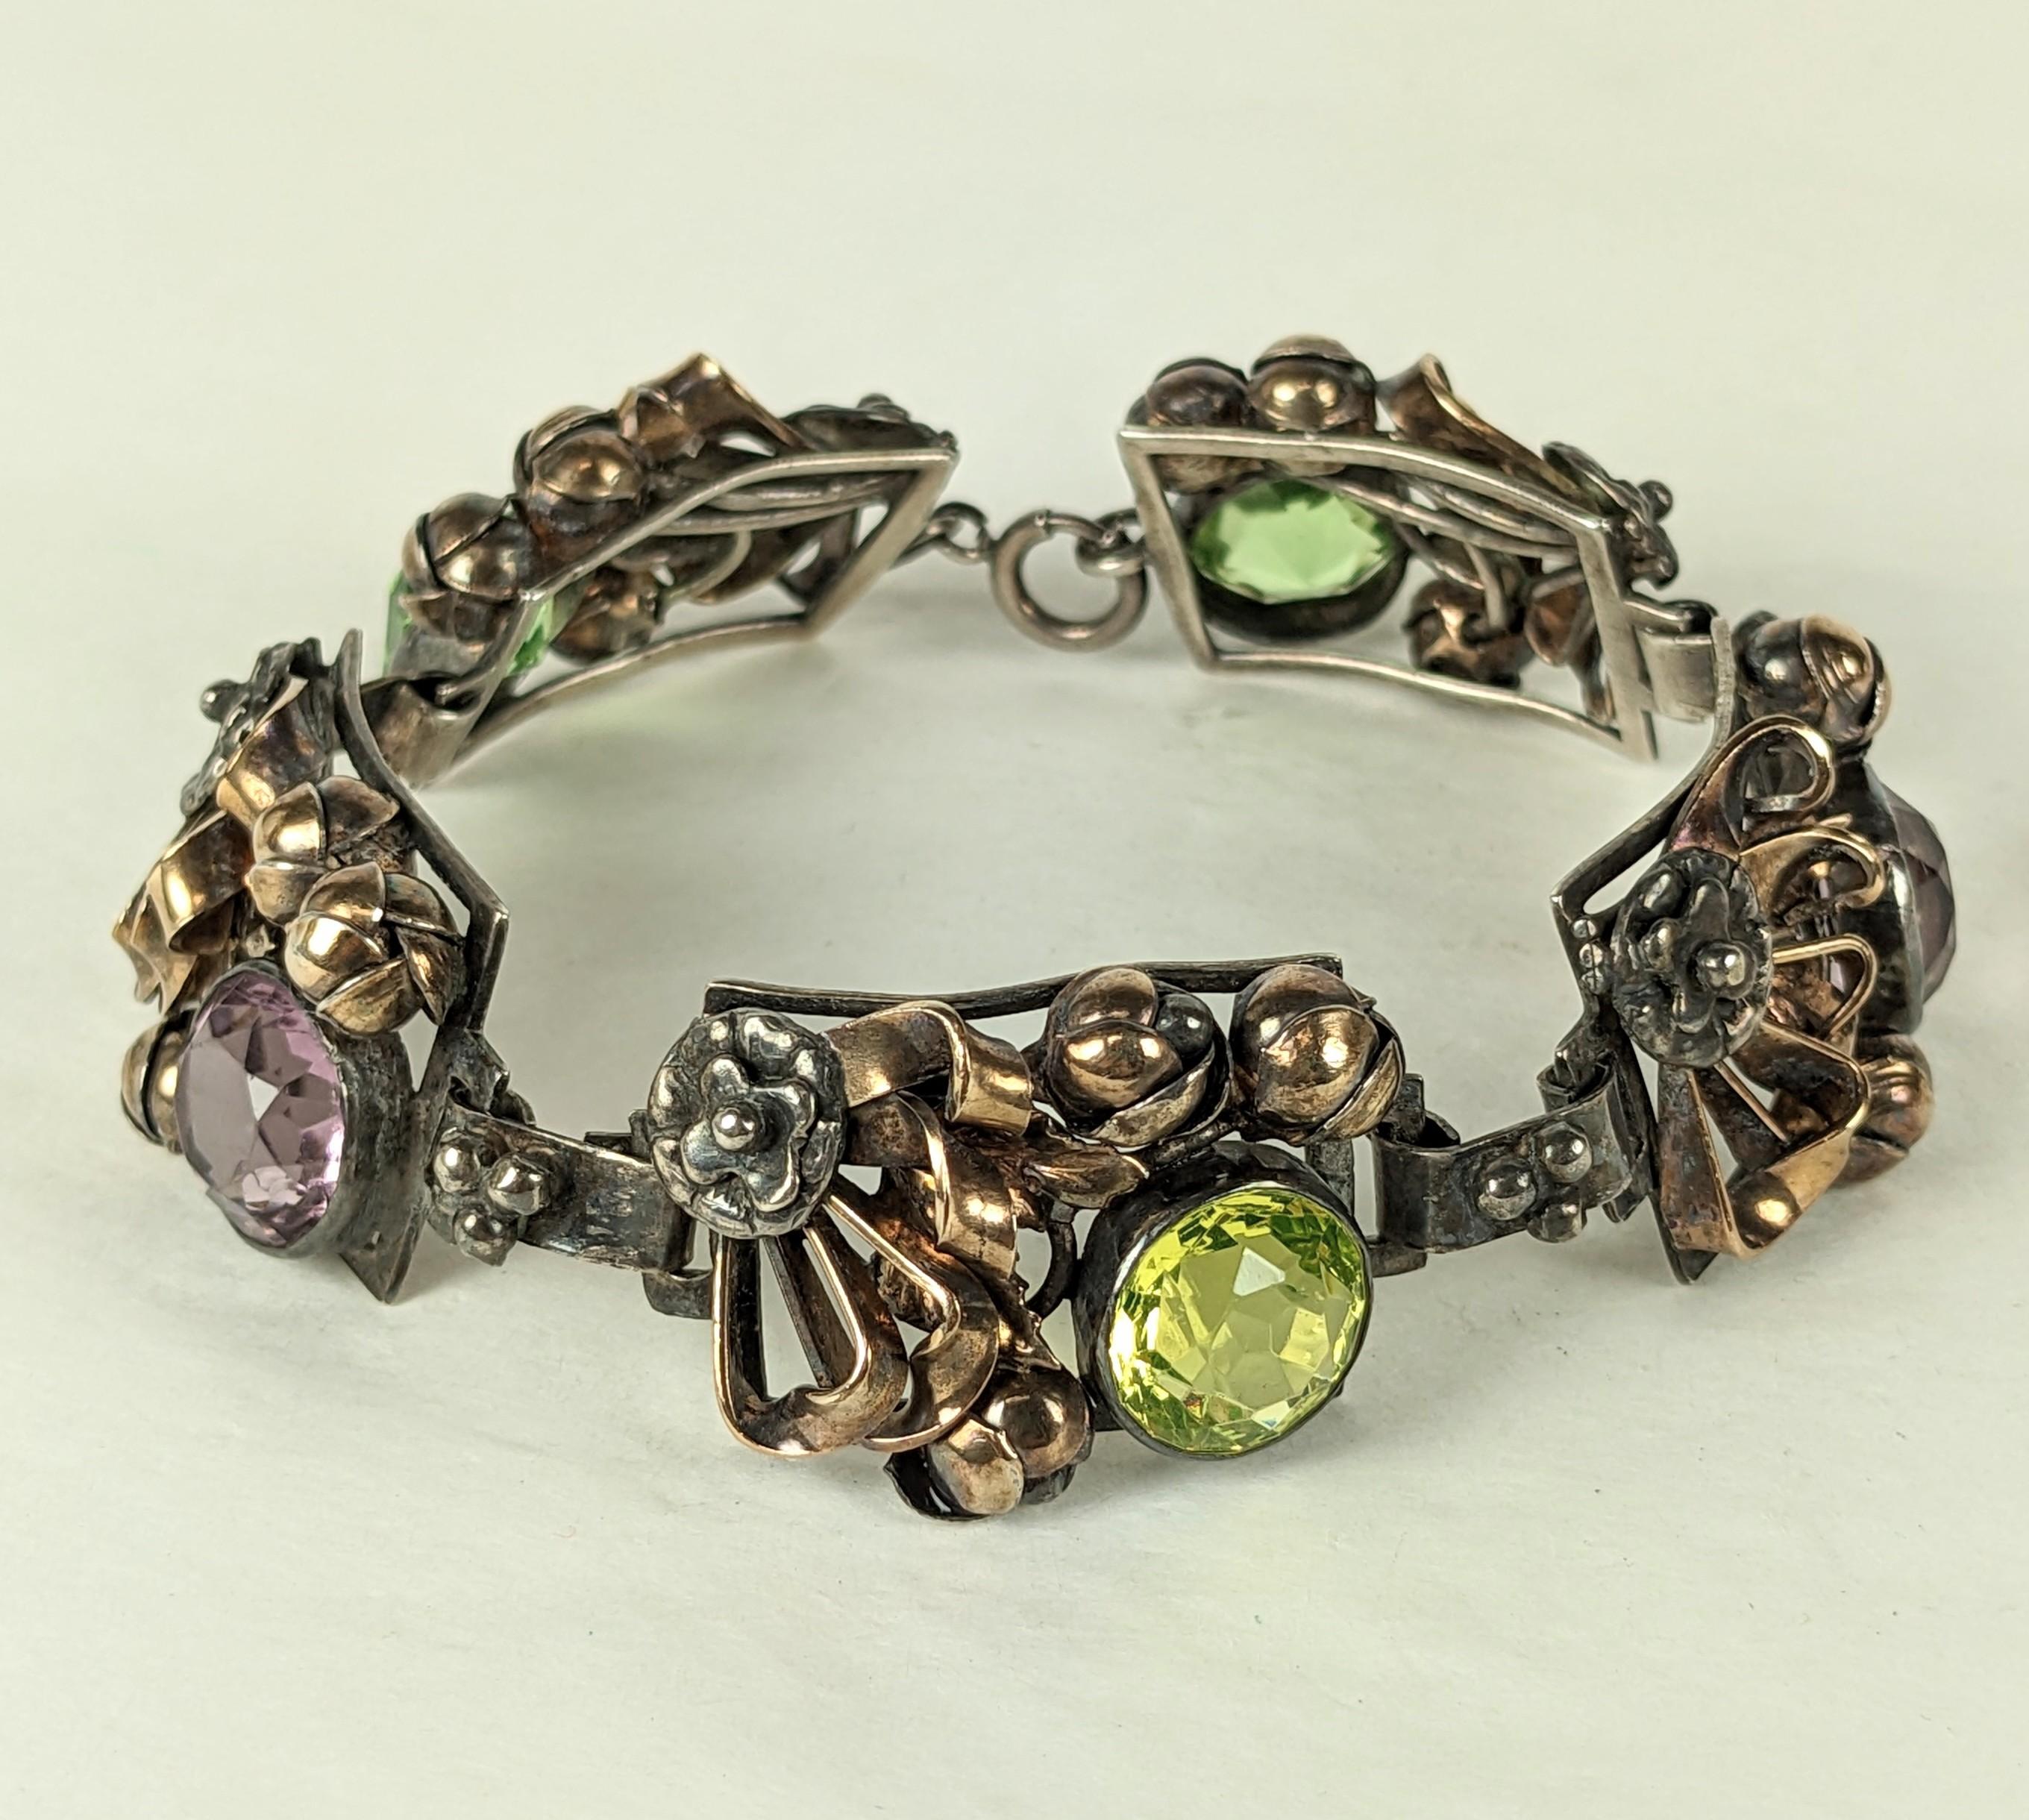 Hobe Sterling Vermeil Crystal Link Bracelet from the 1940's. Handmade with crystals in pink and limey green set in links with flower buds of sterling and rose gold vermeil. Unsigned. 8